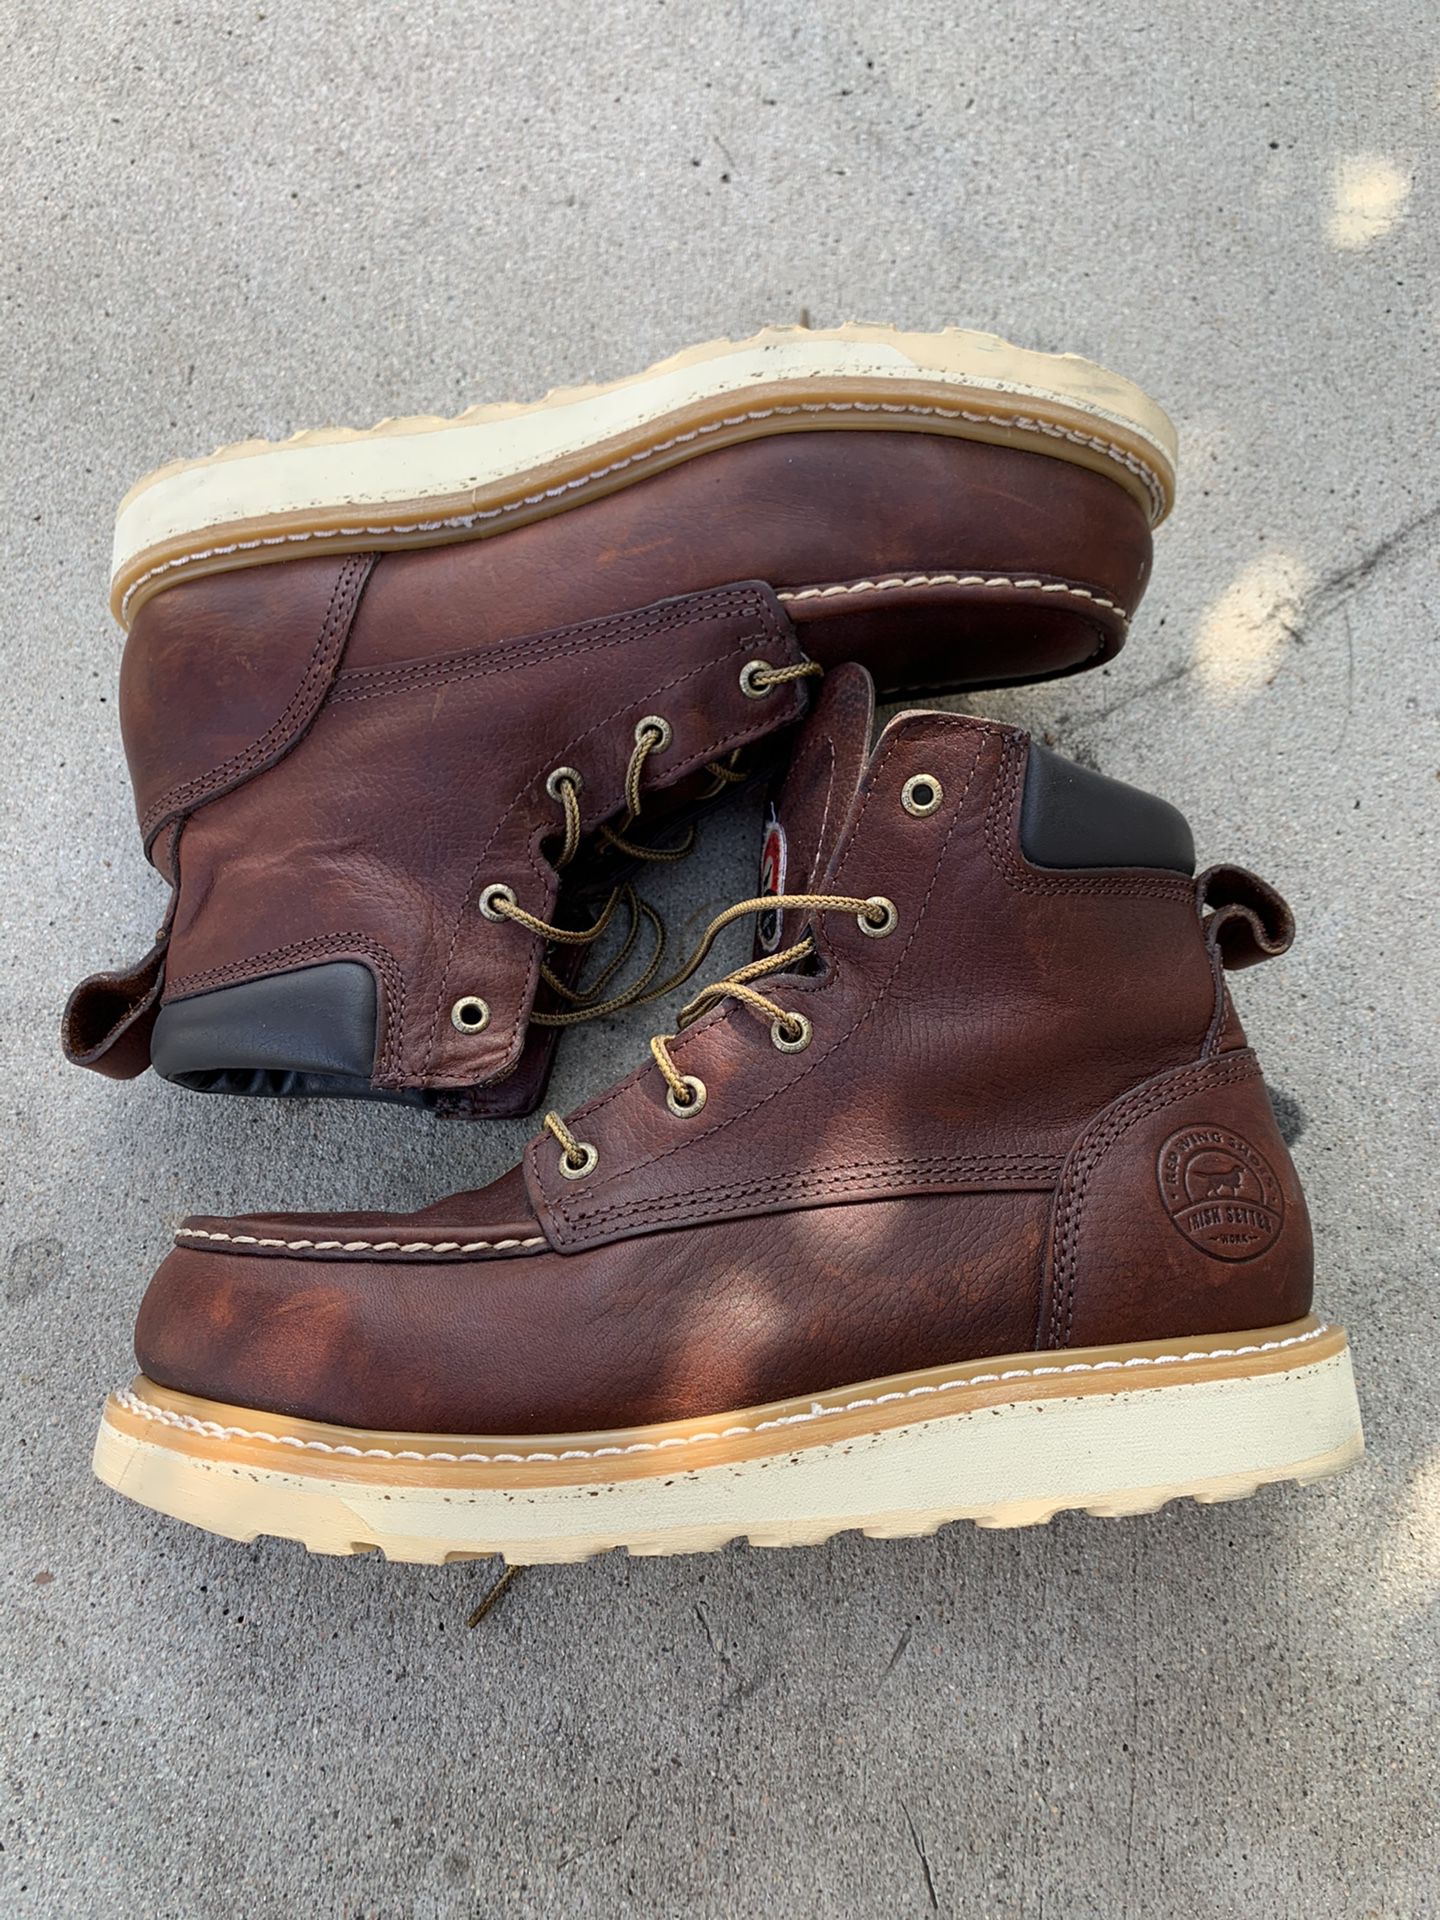 Red Wing Size 10 Men’s 6-Inch Leather Safety Toe Boot for Sale in Santa ...